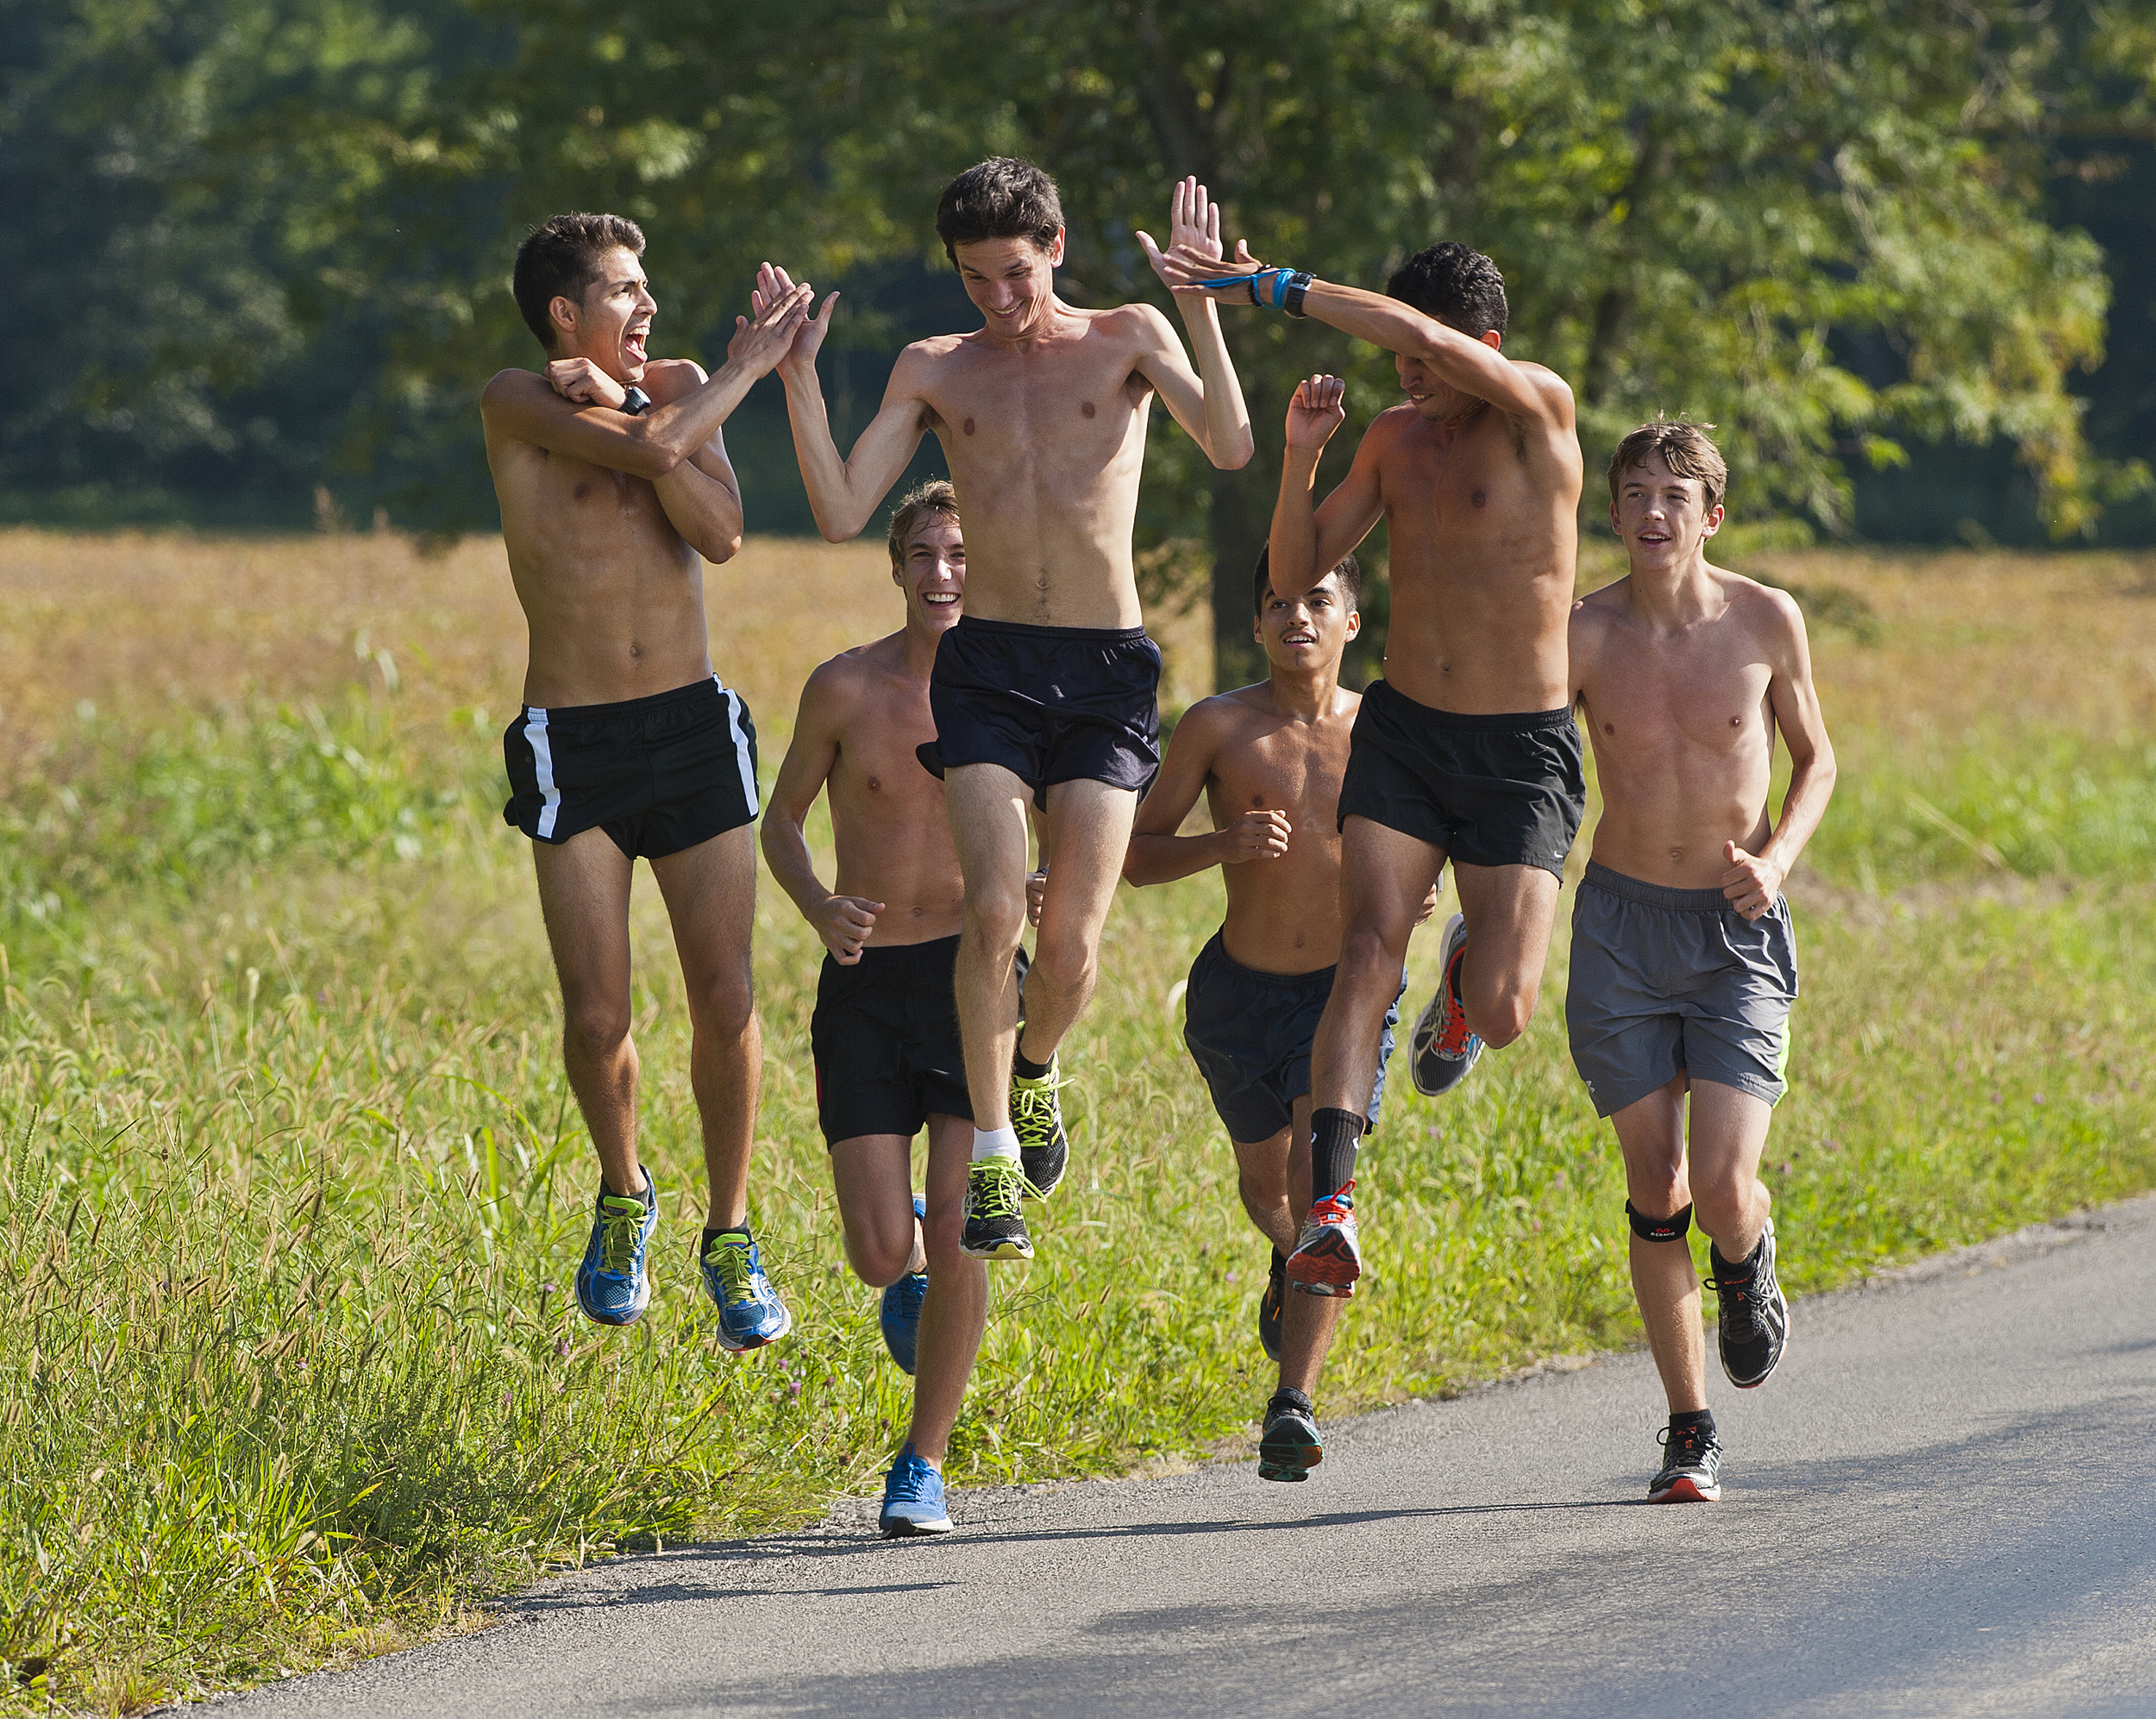  Southern Illinois men’s cross country team members Oscar Medina, Evan Ehrenheim and Juan Carrera share a high five on Wednesday, Sept. 17, 2014, during practice along Dogwood Road in Carbondale, Illinois. The cross country men’s and women’s teams ar